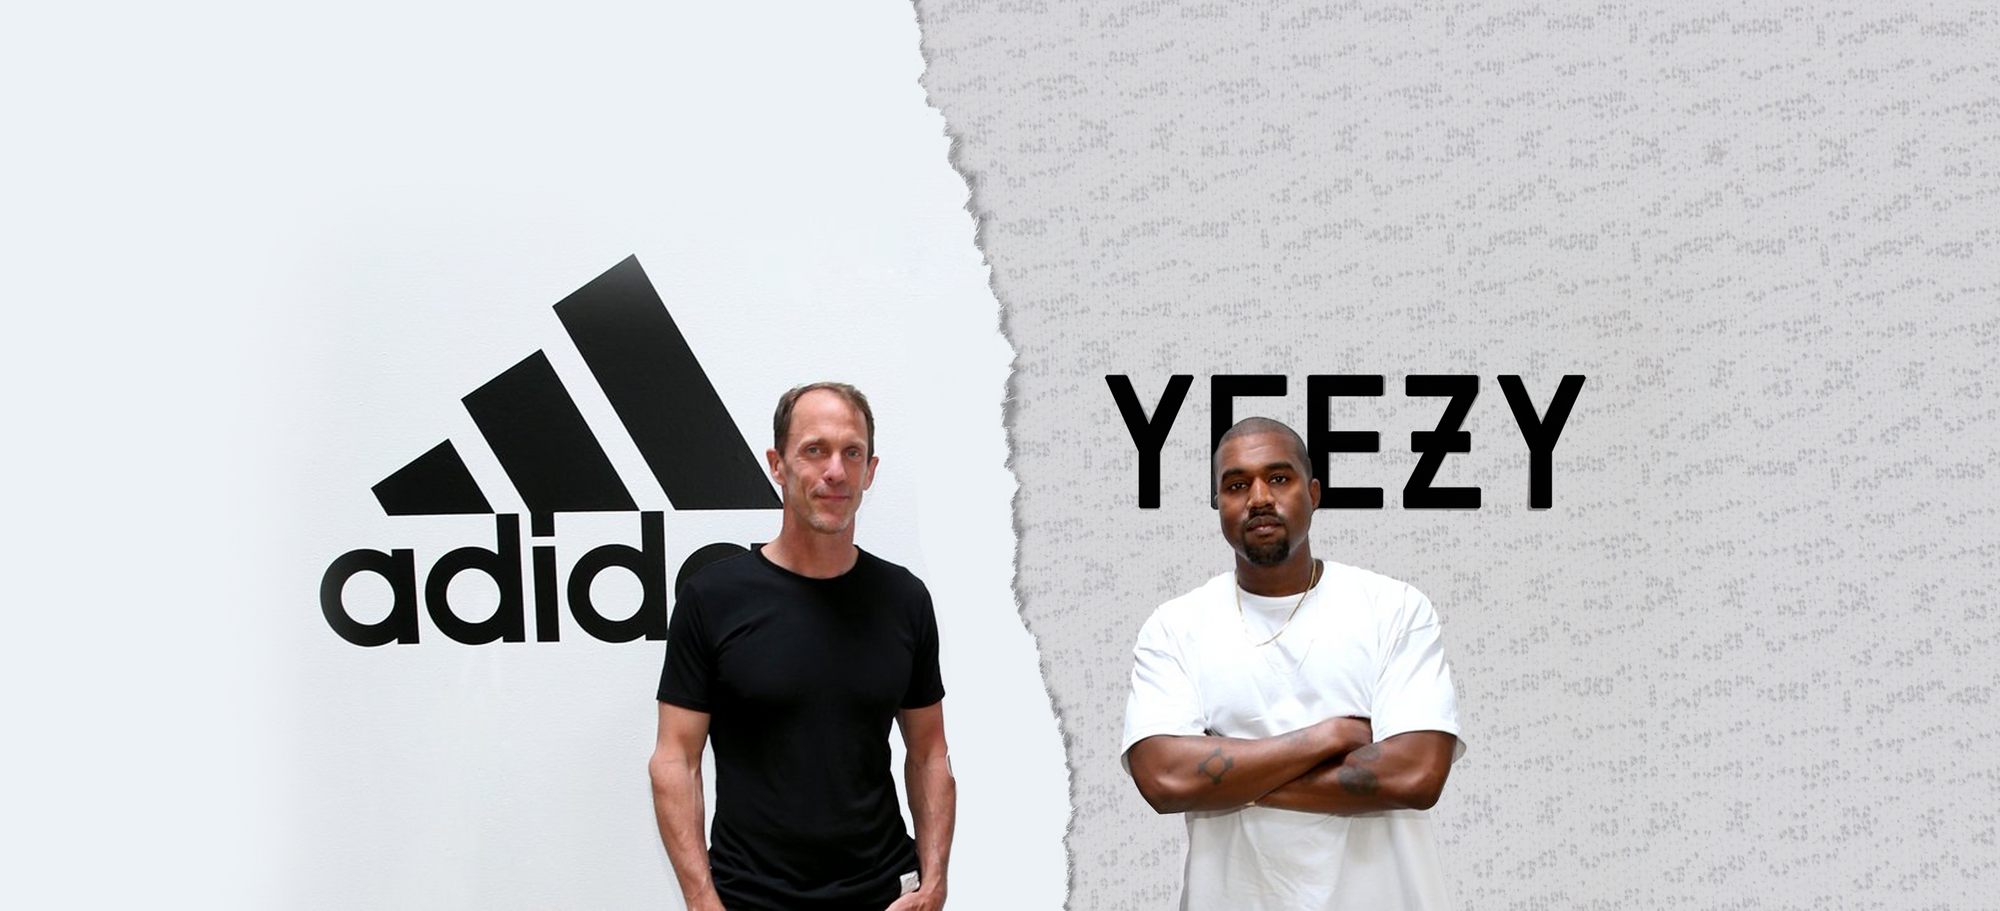 What is the Future of adidas?